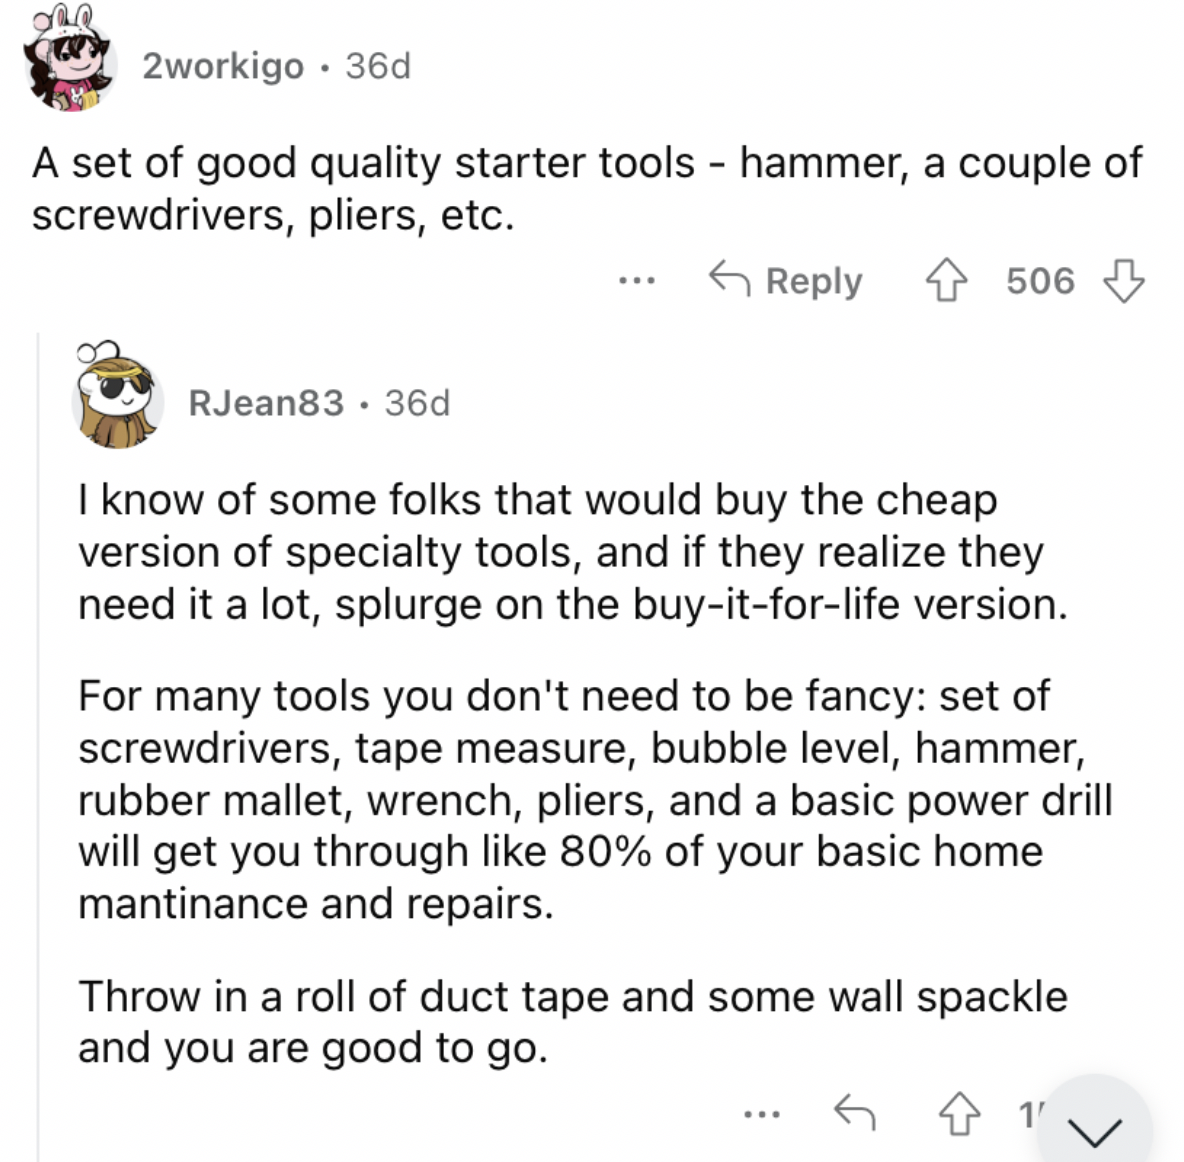 Reddit screenshot about the value of high-quality starter tools.